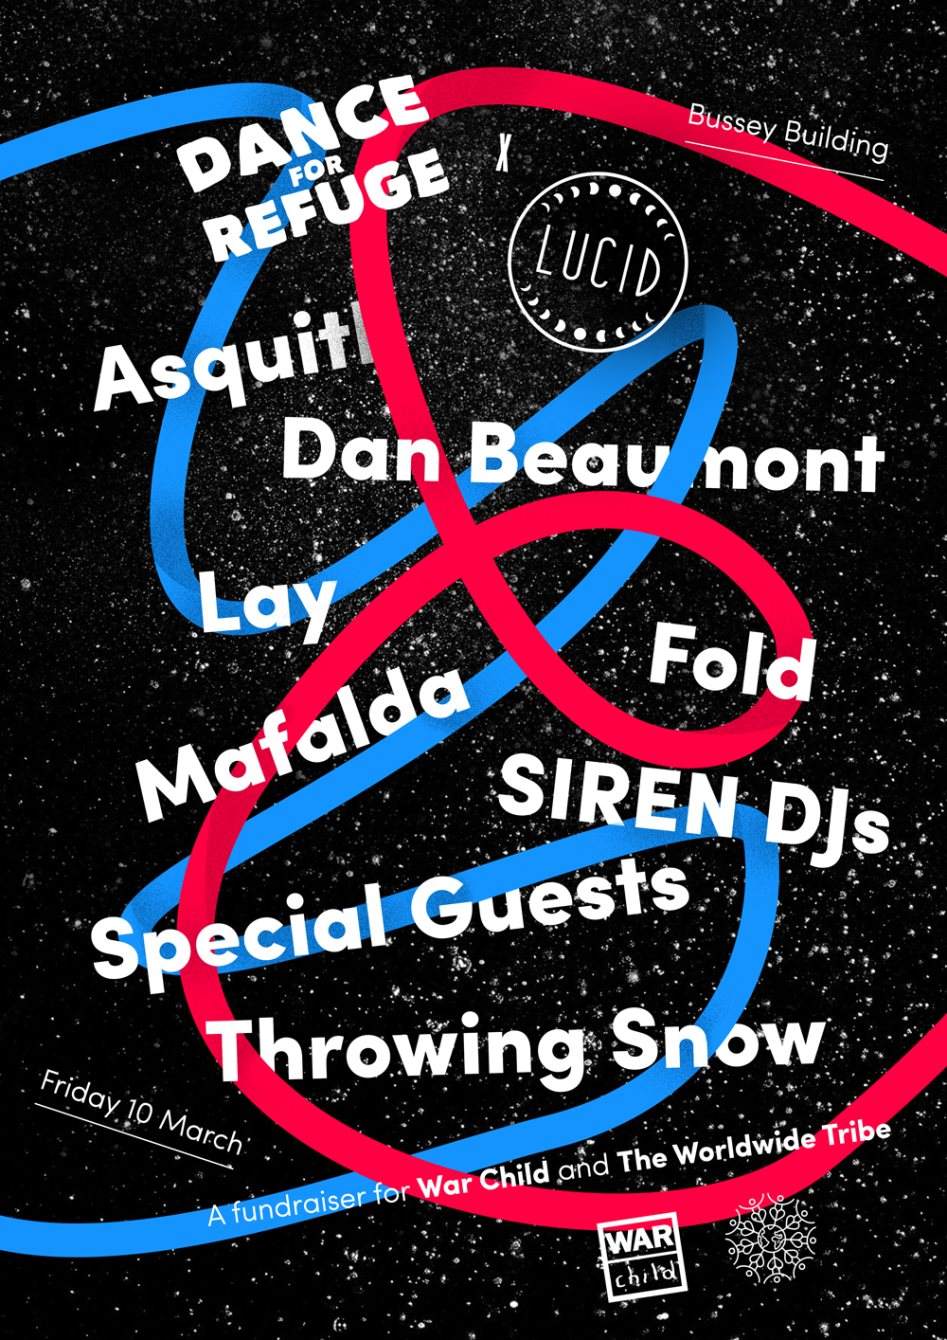 Dance For Refuge x Lucid with Dark Sky, Asquith, Dan Beaumont, Fold, Throwing Snow & More - Flyer front